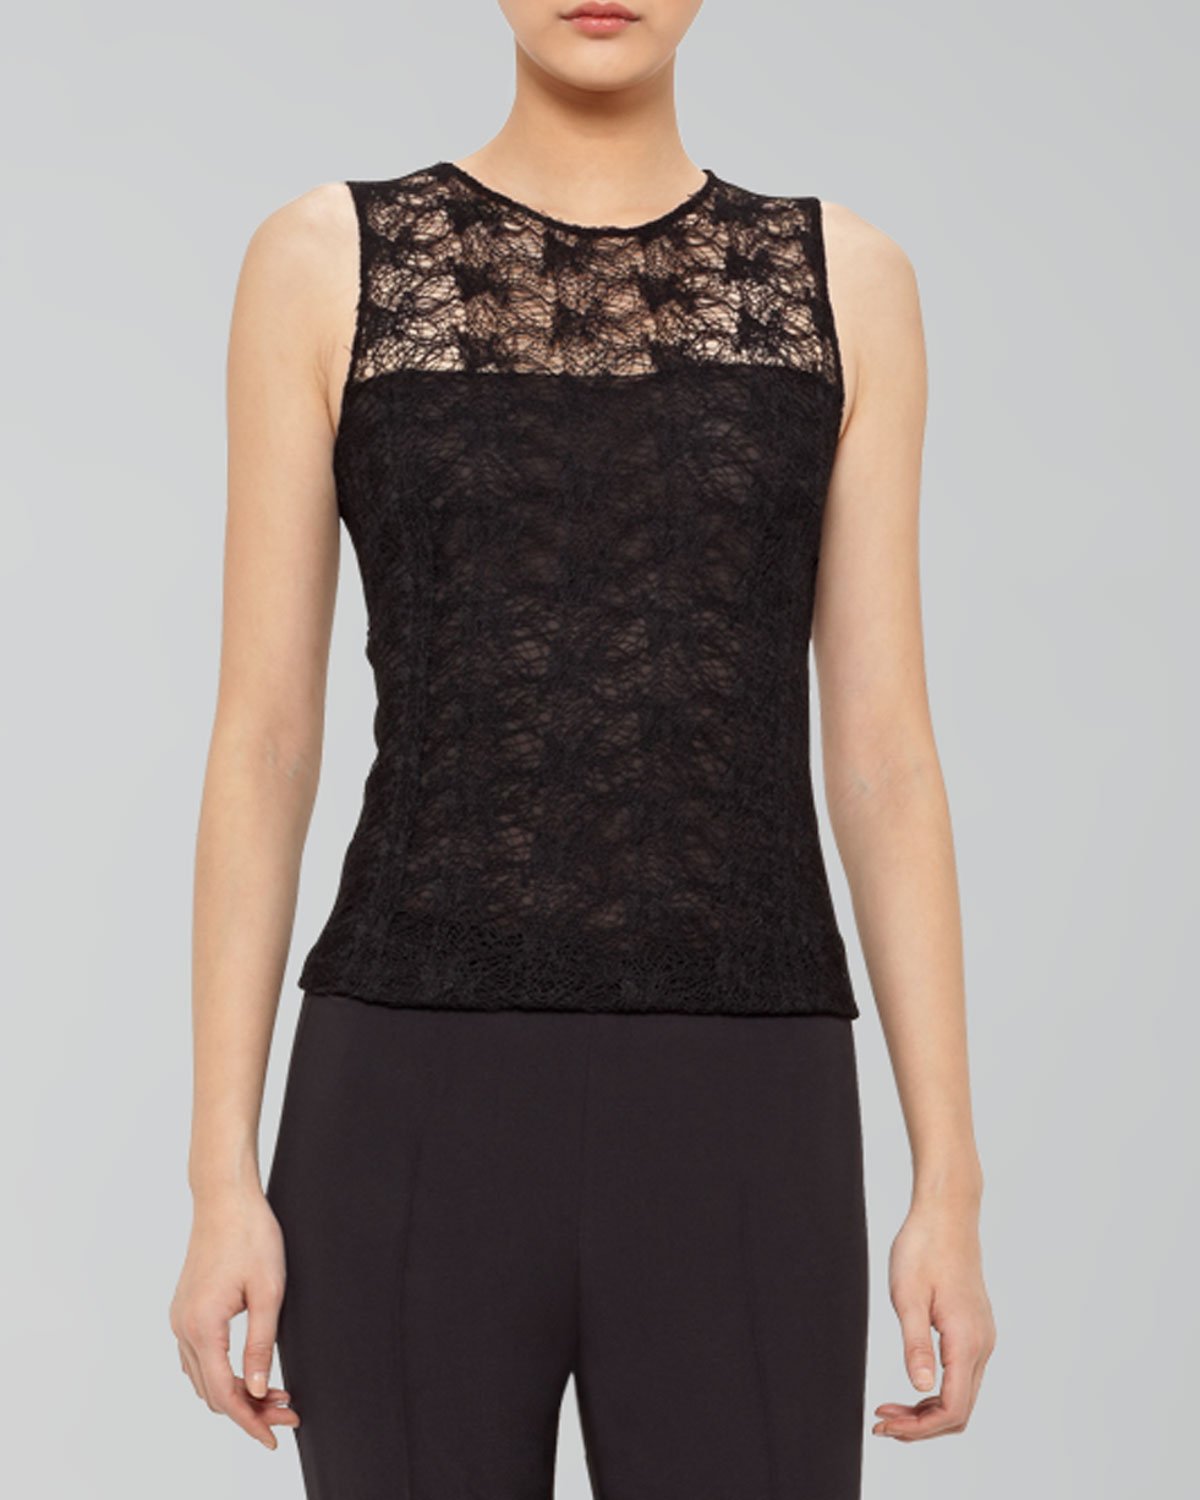 Lyst - Akris Sleeveless Lace Top in Black